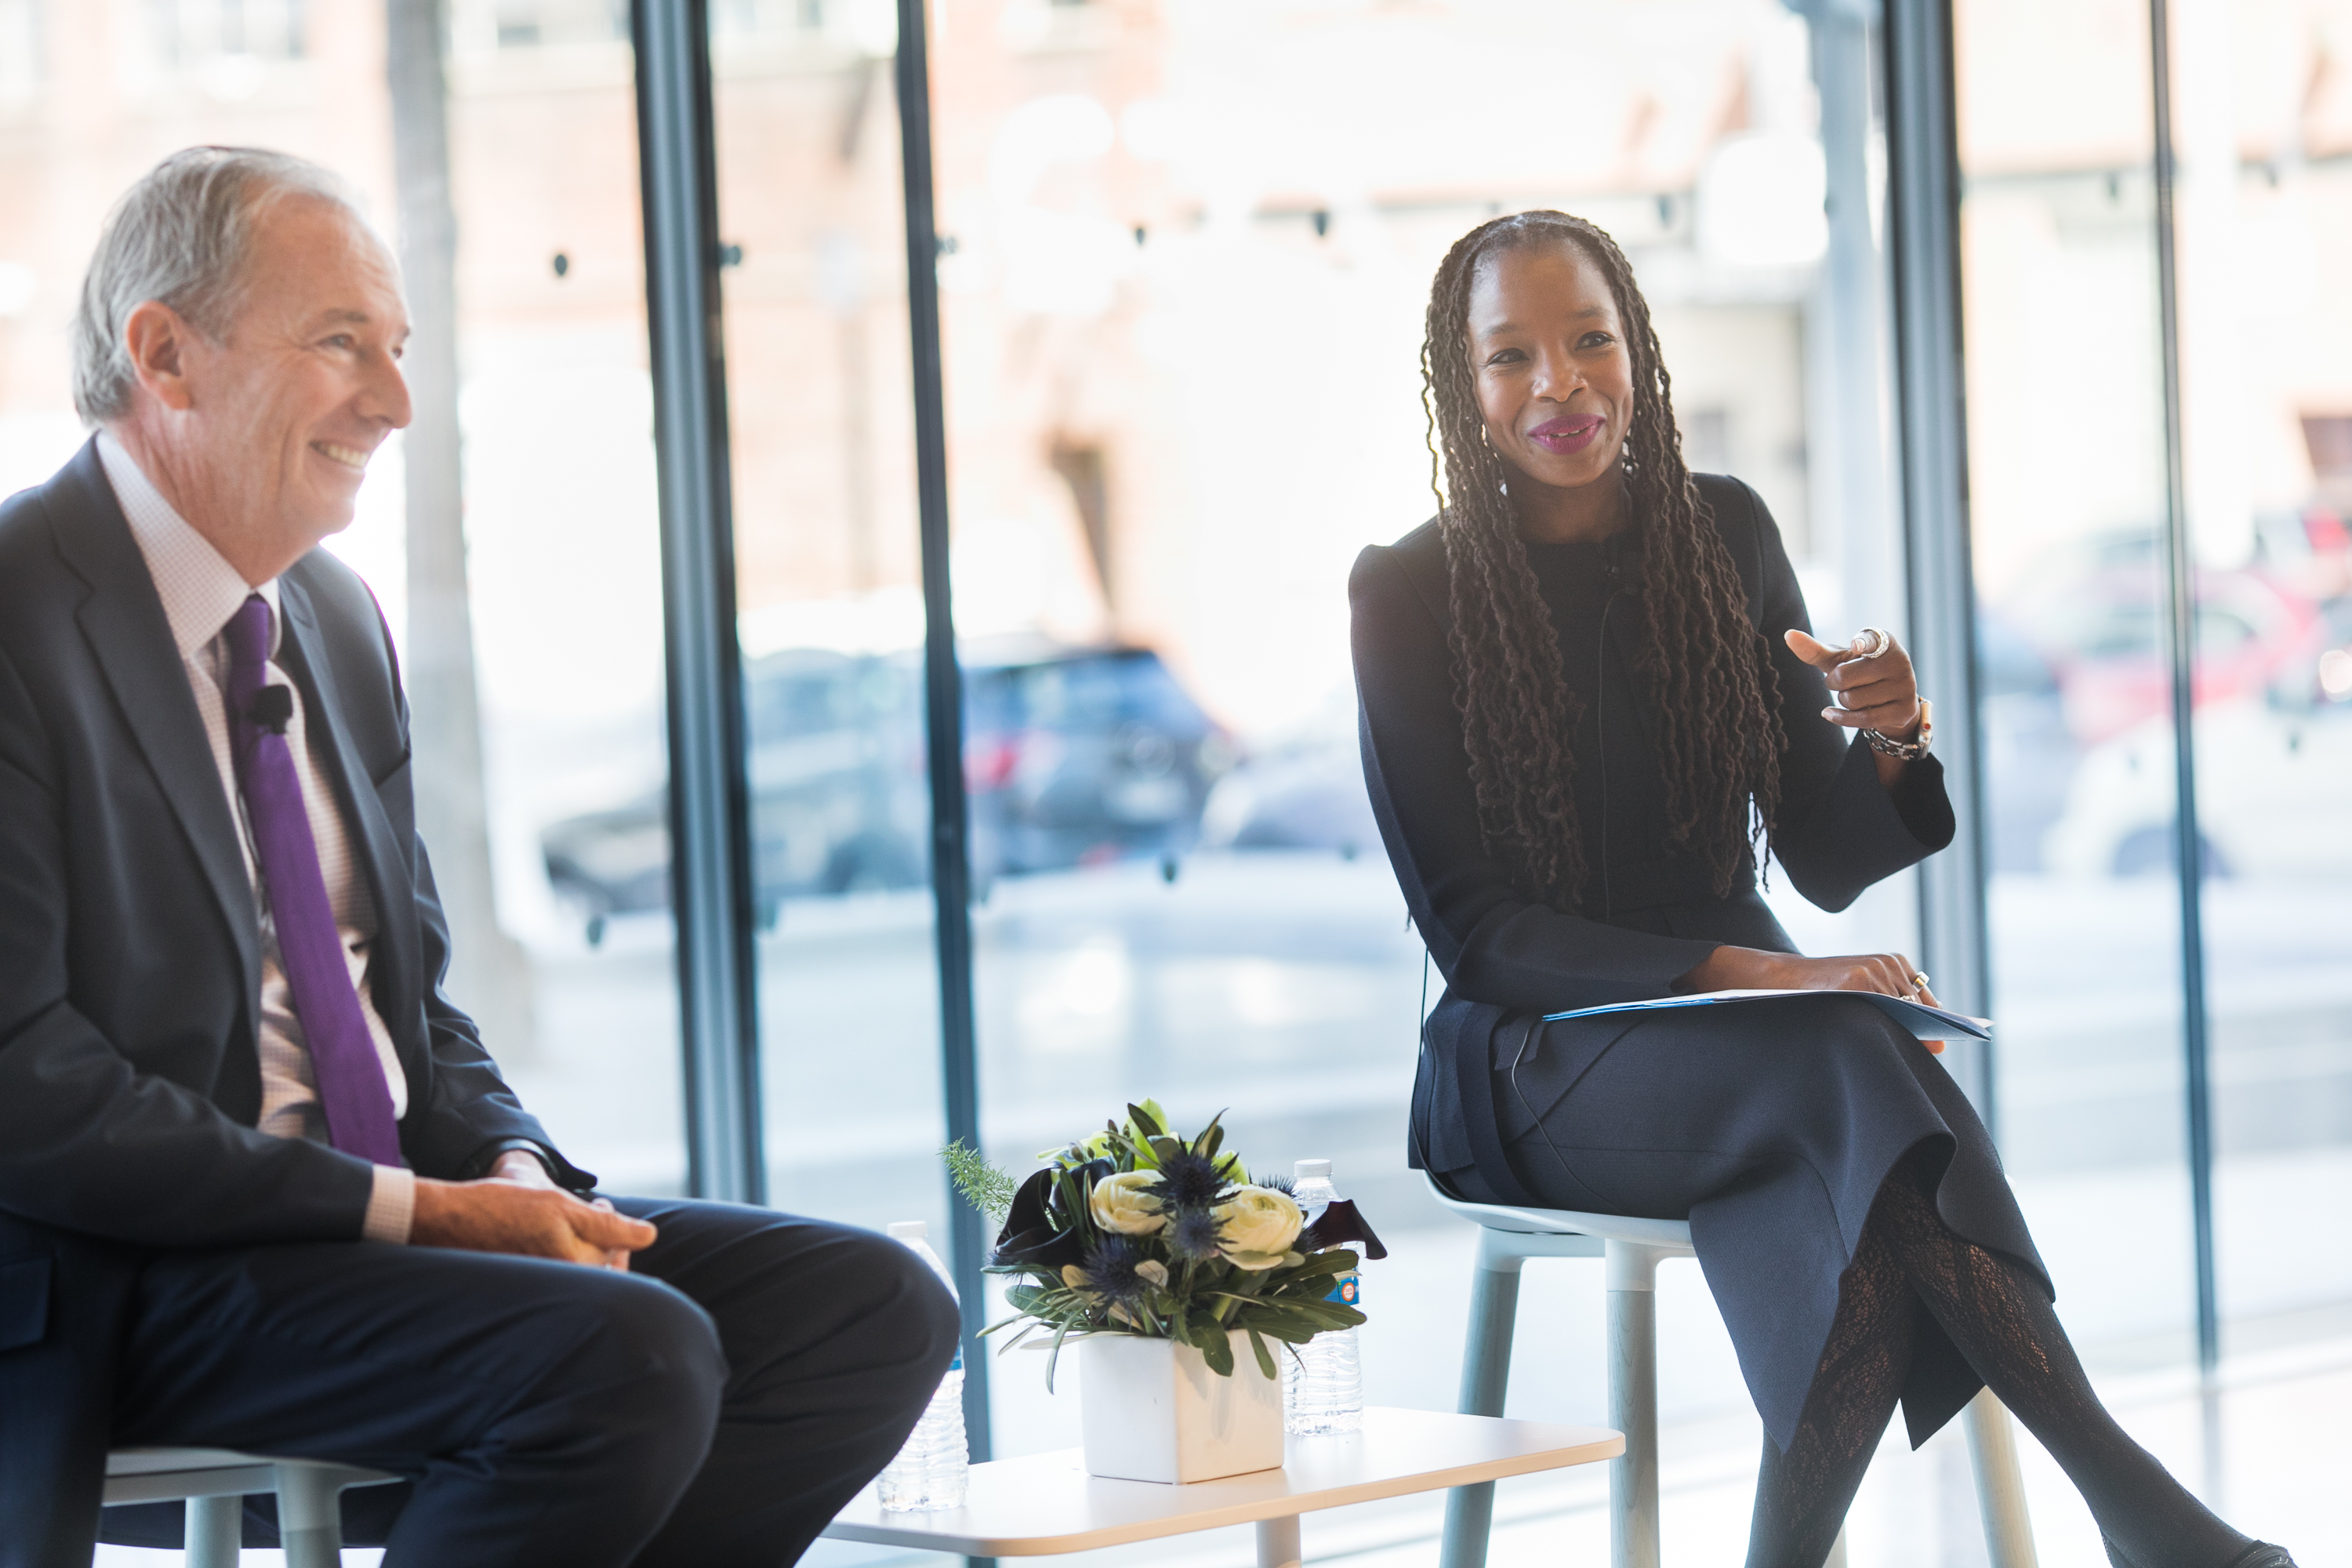 Modupe Akinola, associate professor of management, with James P. Gorman '87, chairman and CEO of Morgan Stanley and chair of the Columbia Business School Board, discussing “Diversity, Equity, and Inclusion as a Core Organizational Value” at Reunion 2022.